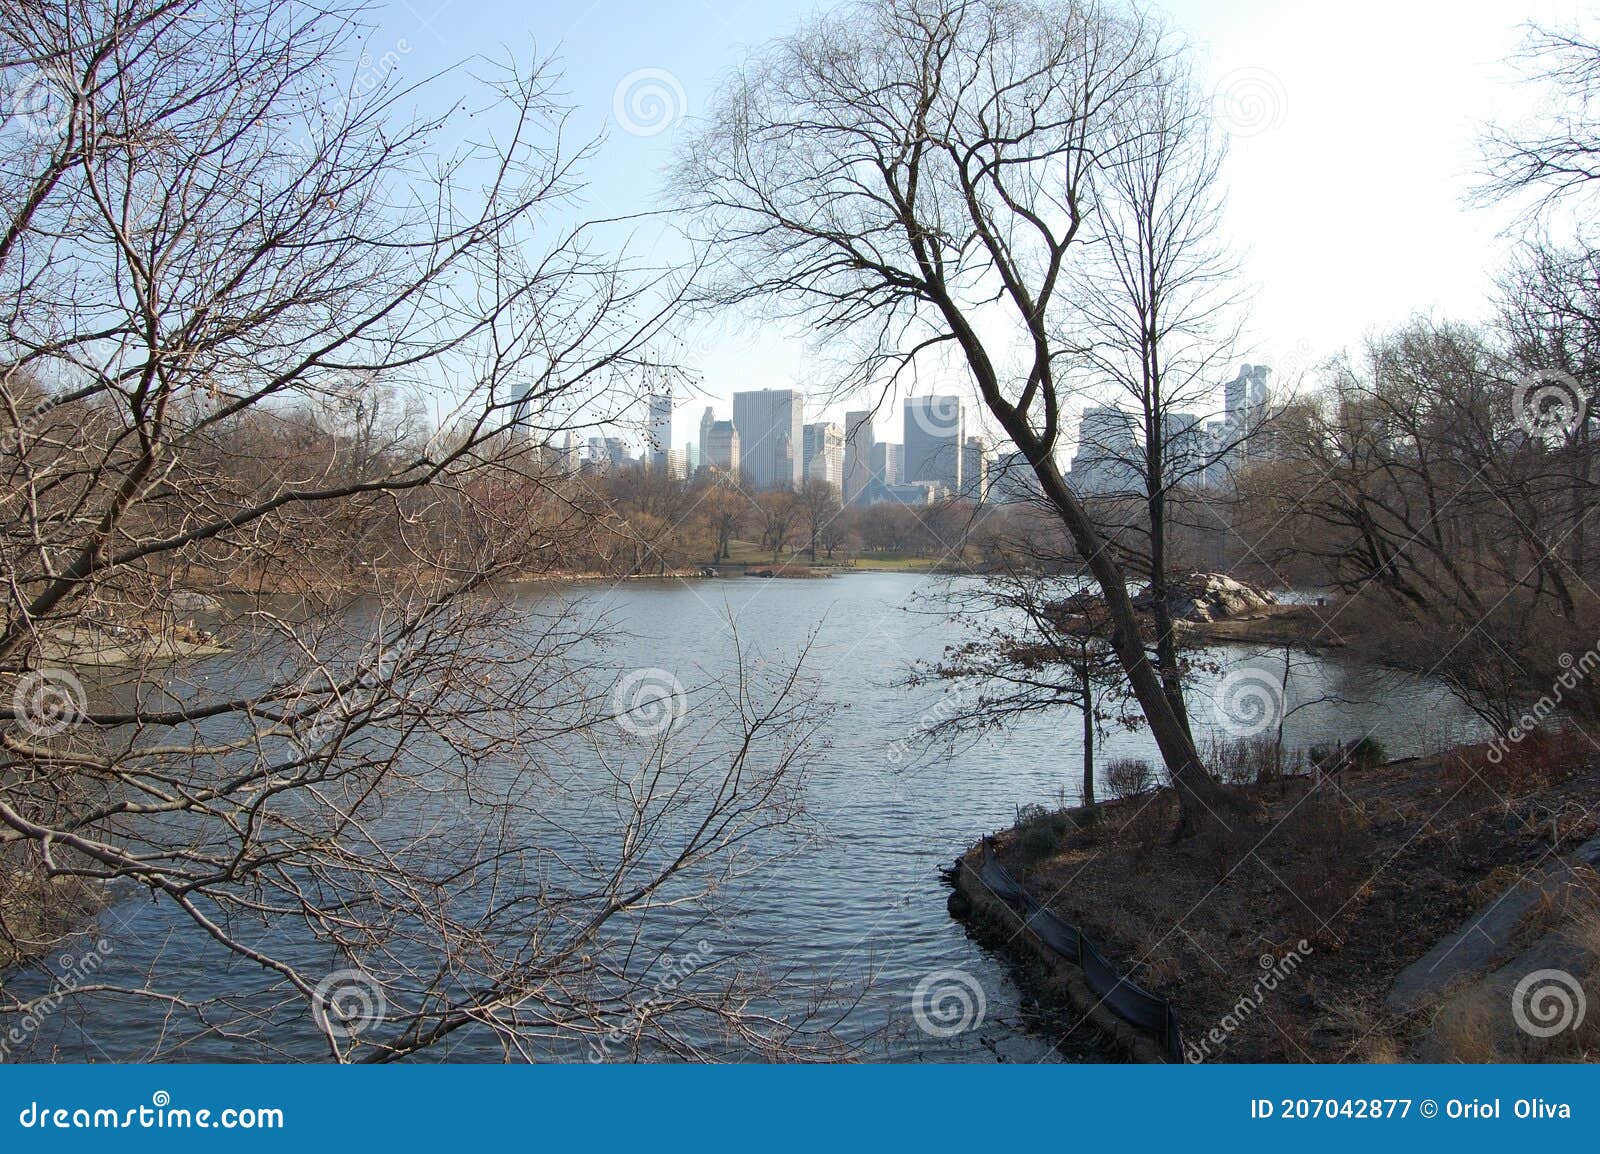 view of the most emblematic buildings and skyscrapers of manhattan (new york). central park